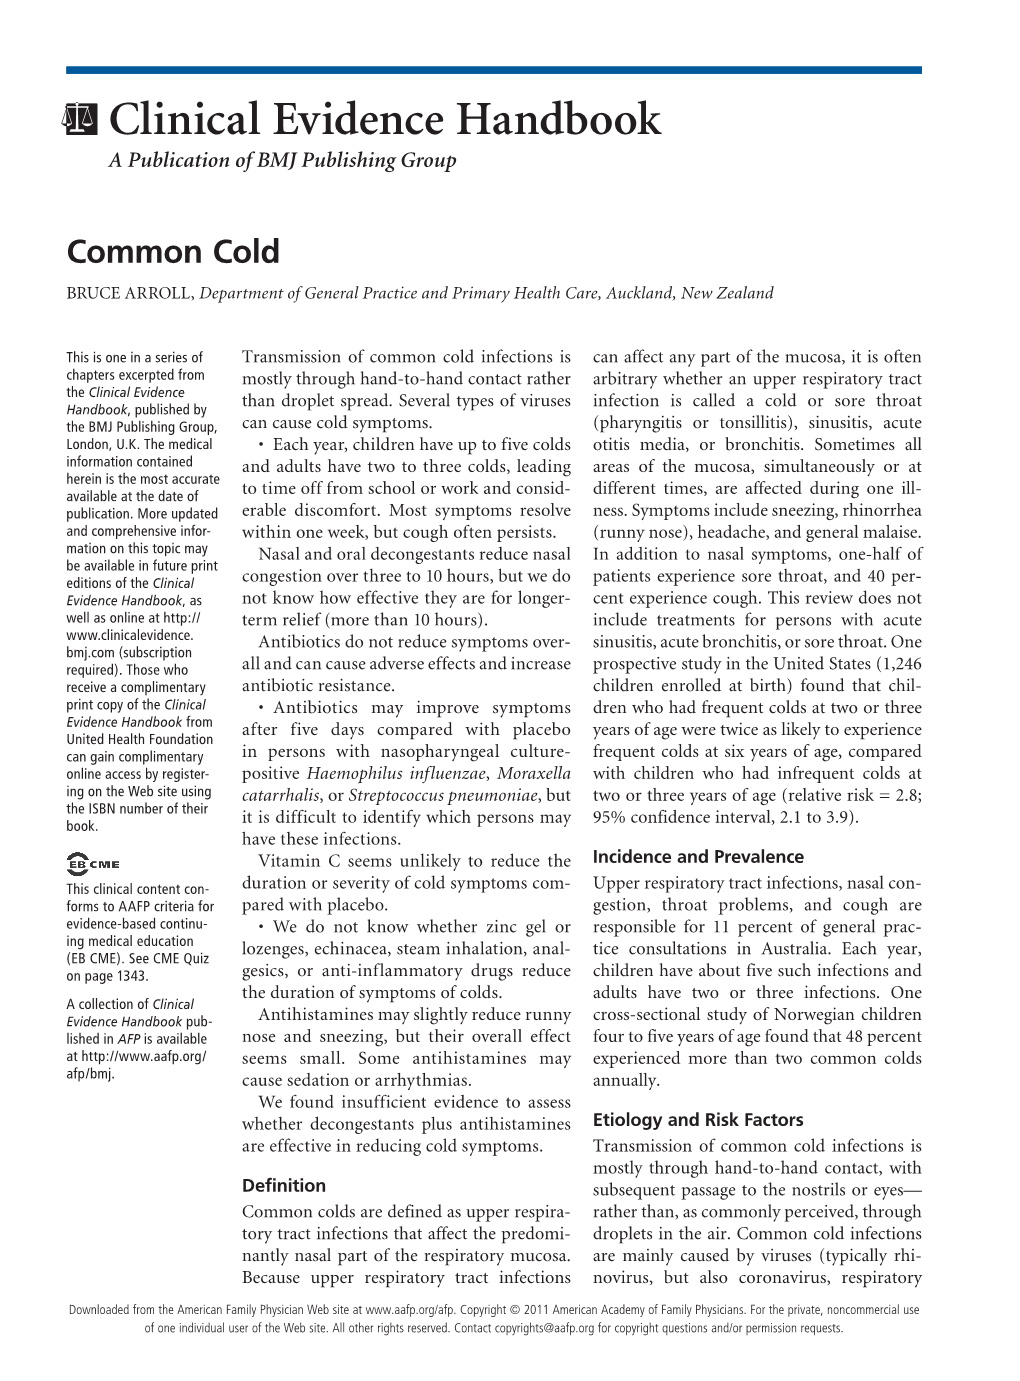 Common Cold BRUCE ARROLL, Department of General Practice and Primary Health Care, Auckland, New Zealand